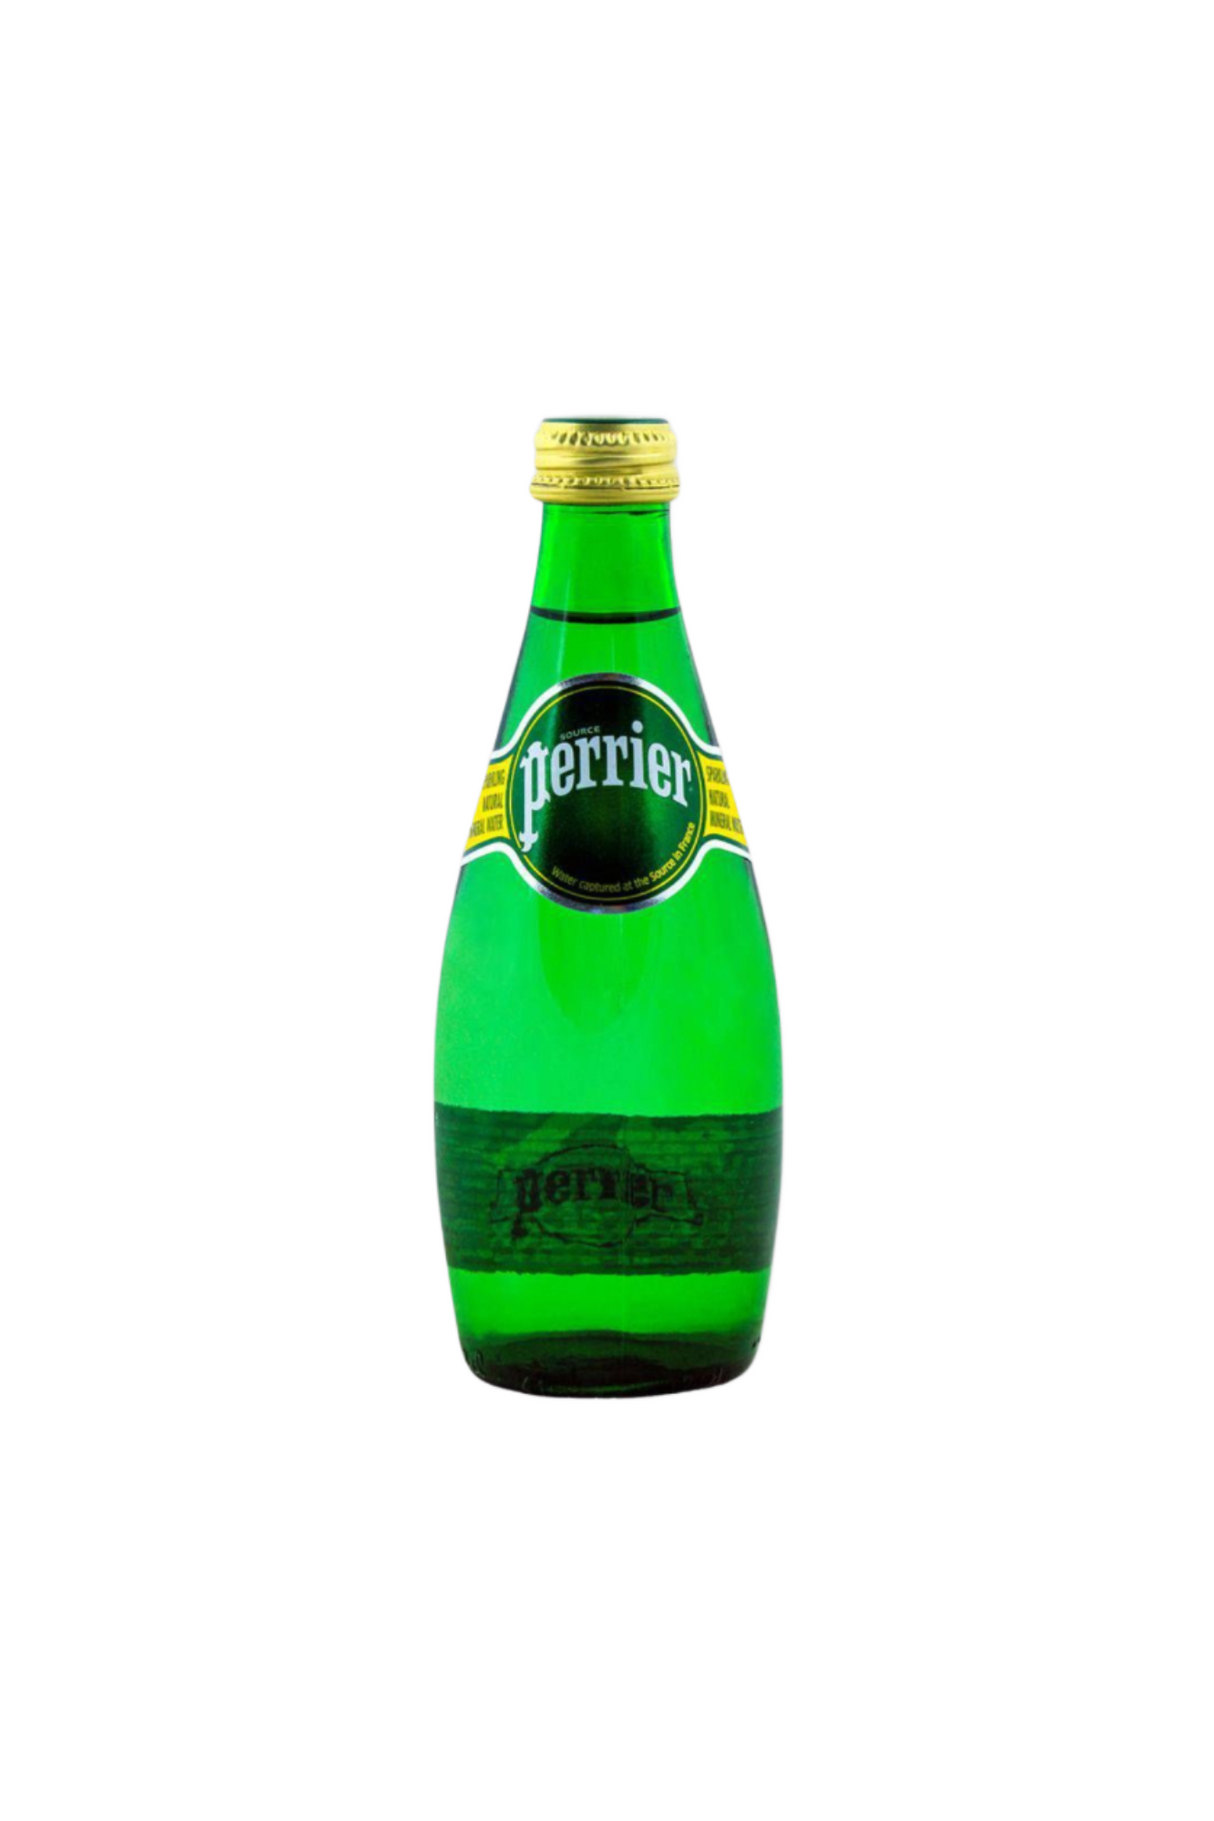 perrier sparkling mineral water 330ml